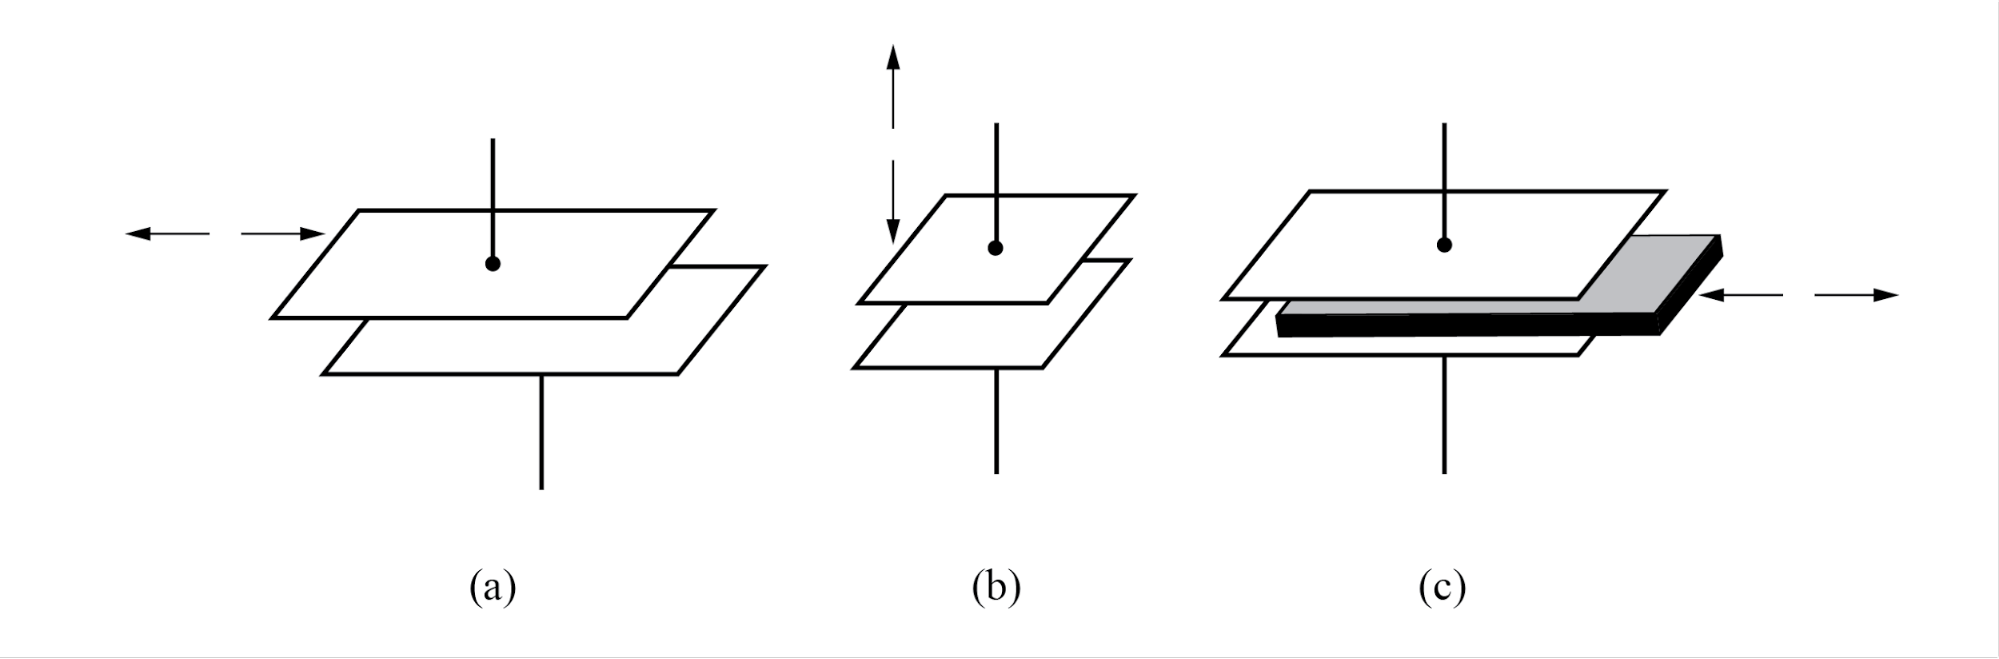 Variable capacitive transducer varies; (a) area of overlap, (b) distance between plates, (c) amount of dielectric between plates.